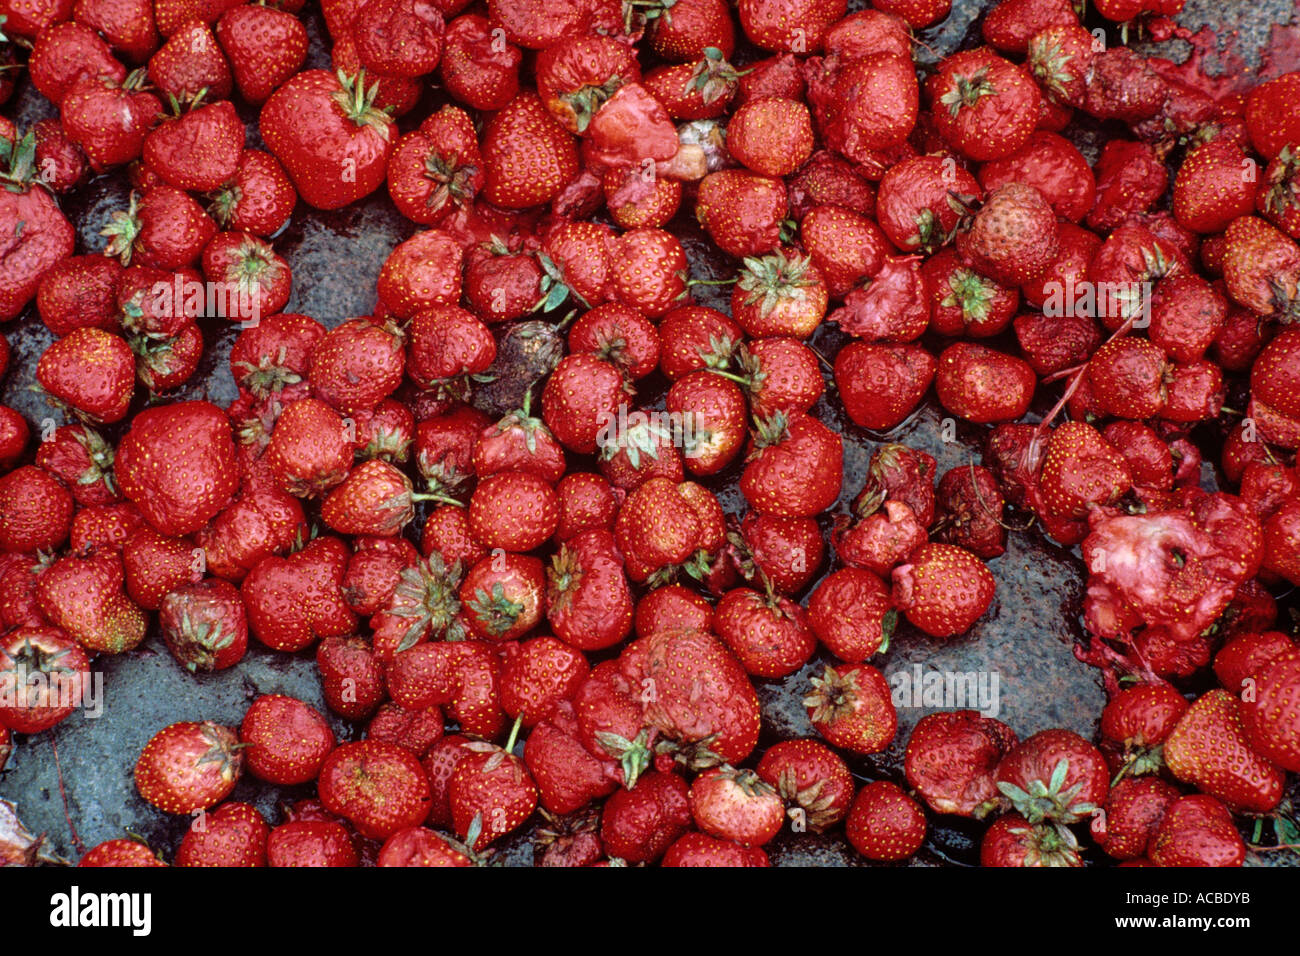 molded and squashed strawberries at wholesale market Stock Photo